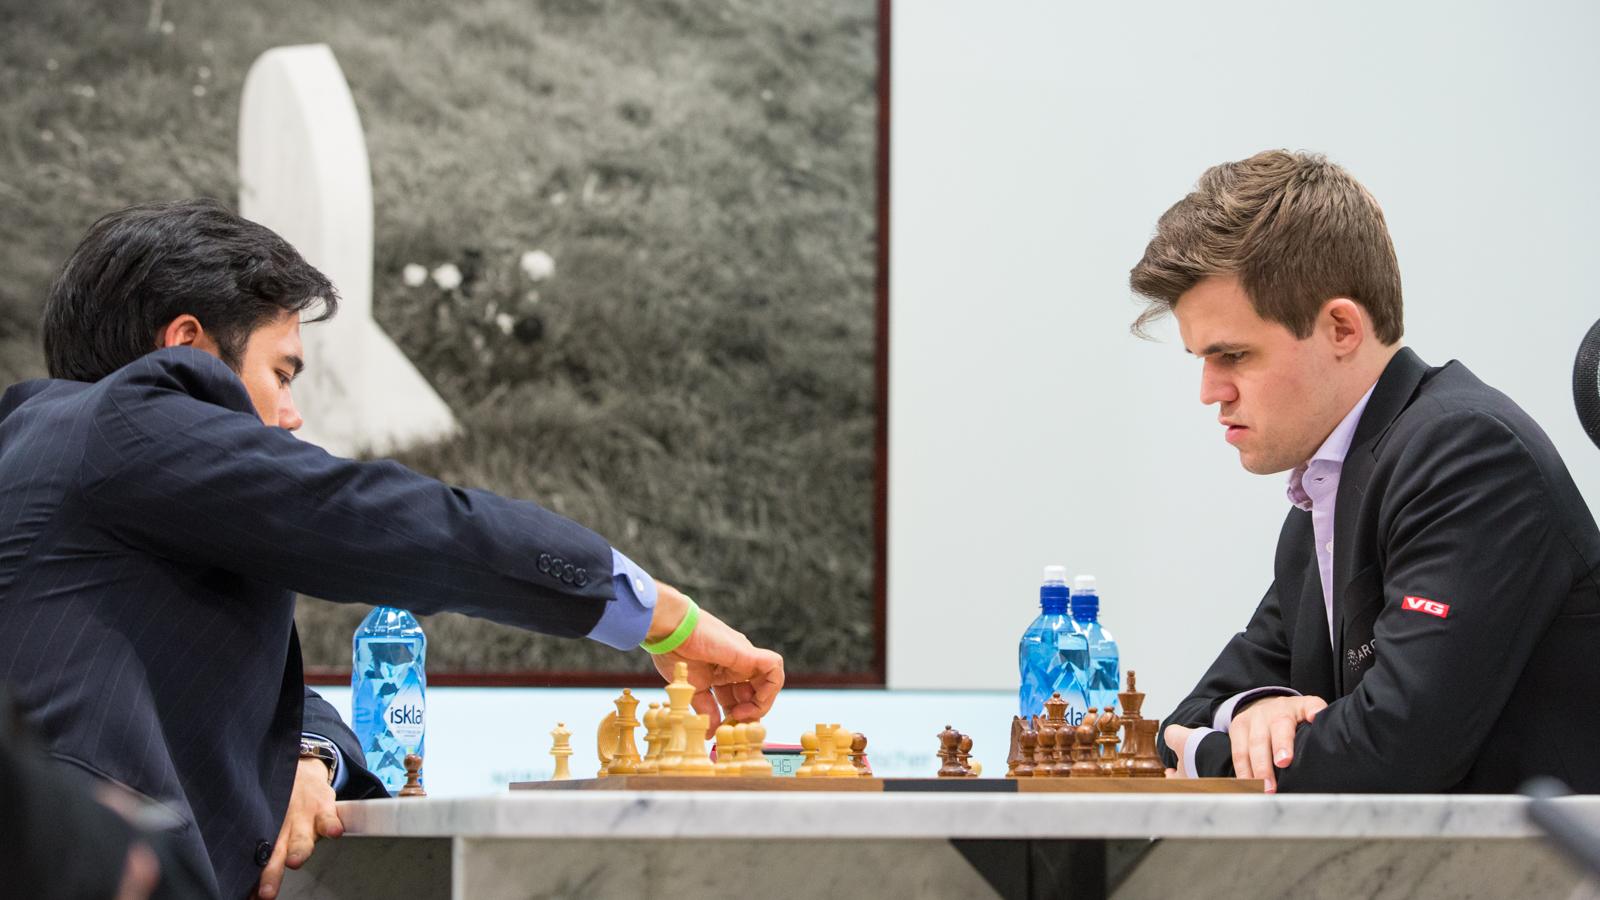 New US World Champion – Nakamura follows in Bobby Fischer's footsteps